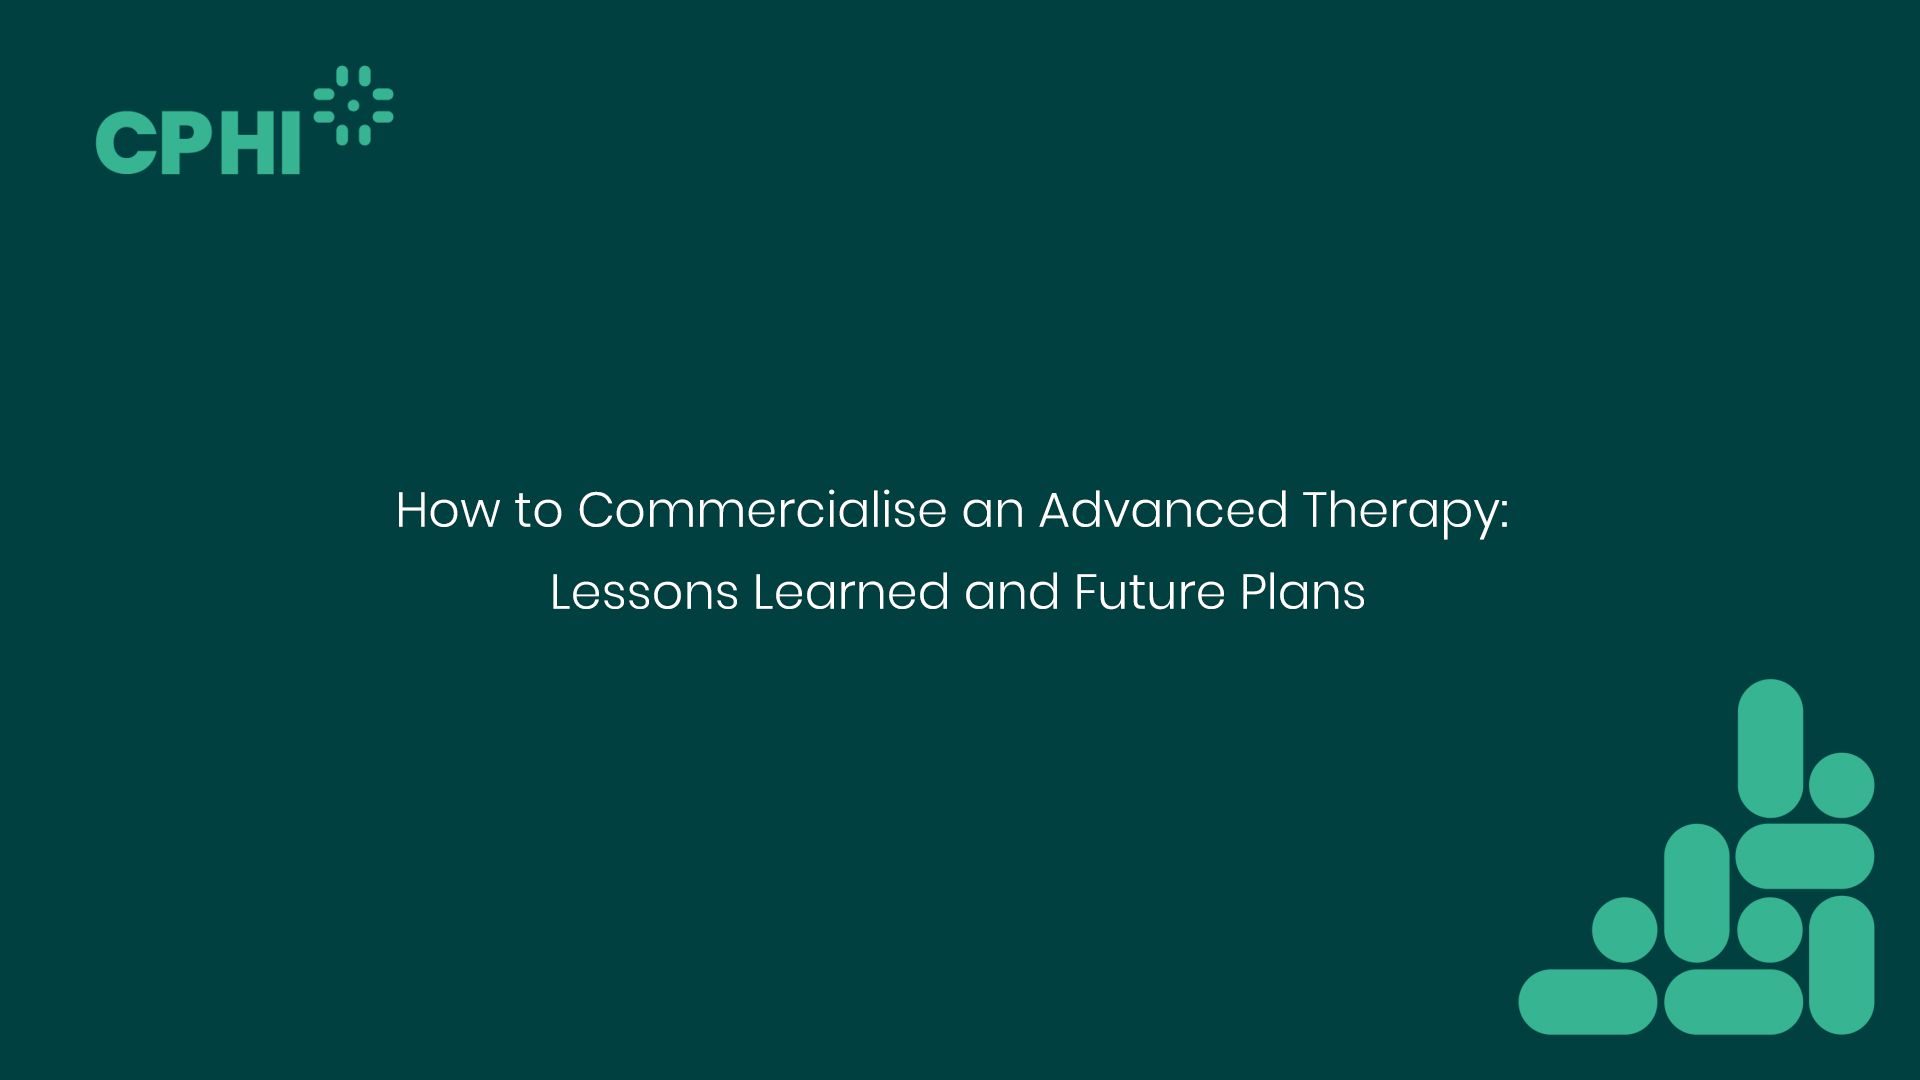 How to Commercialise an Advanced Therapy: Lessons Learned and Future Plans